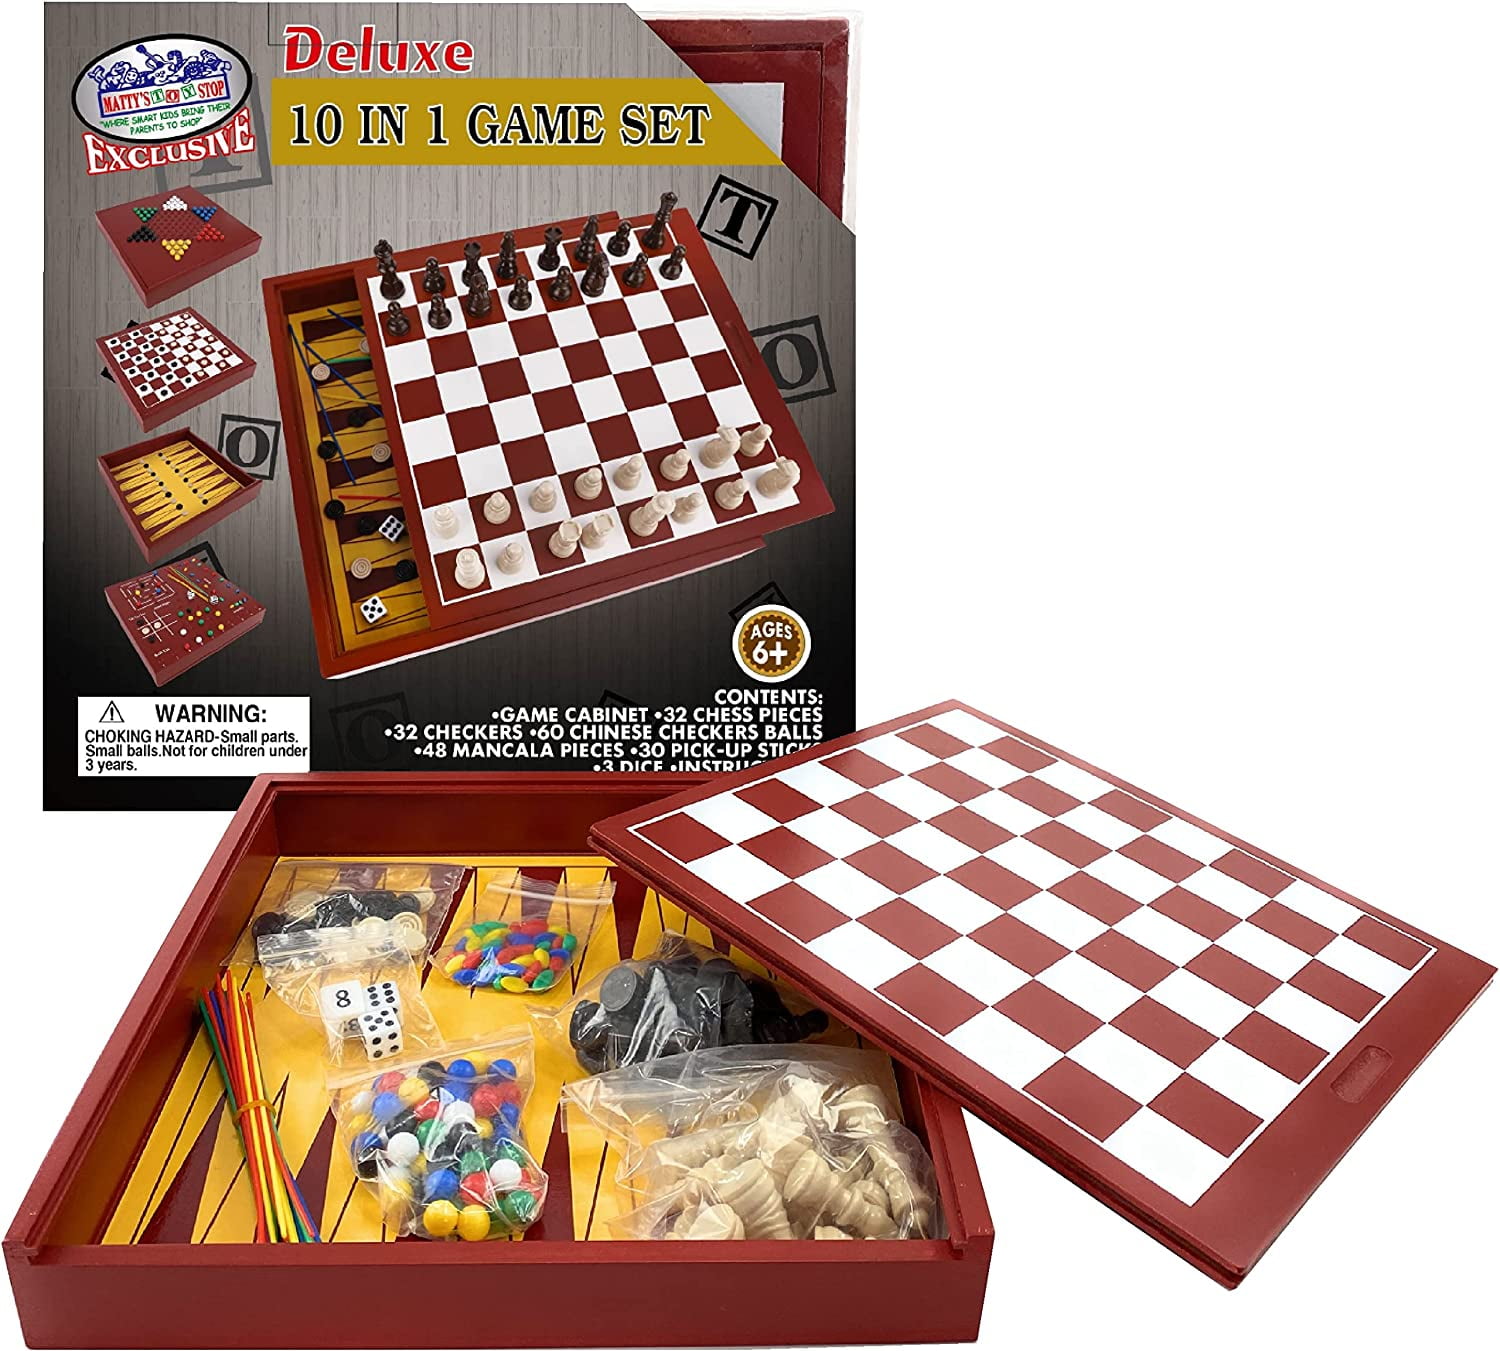 Nirvana-Class 8 Inch Handmade Stone Chess With Wooden Storage Box Checkers Board 